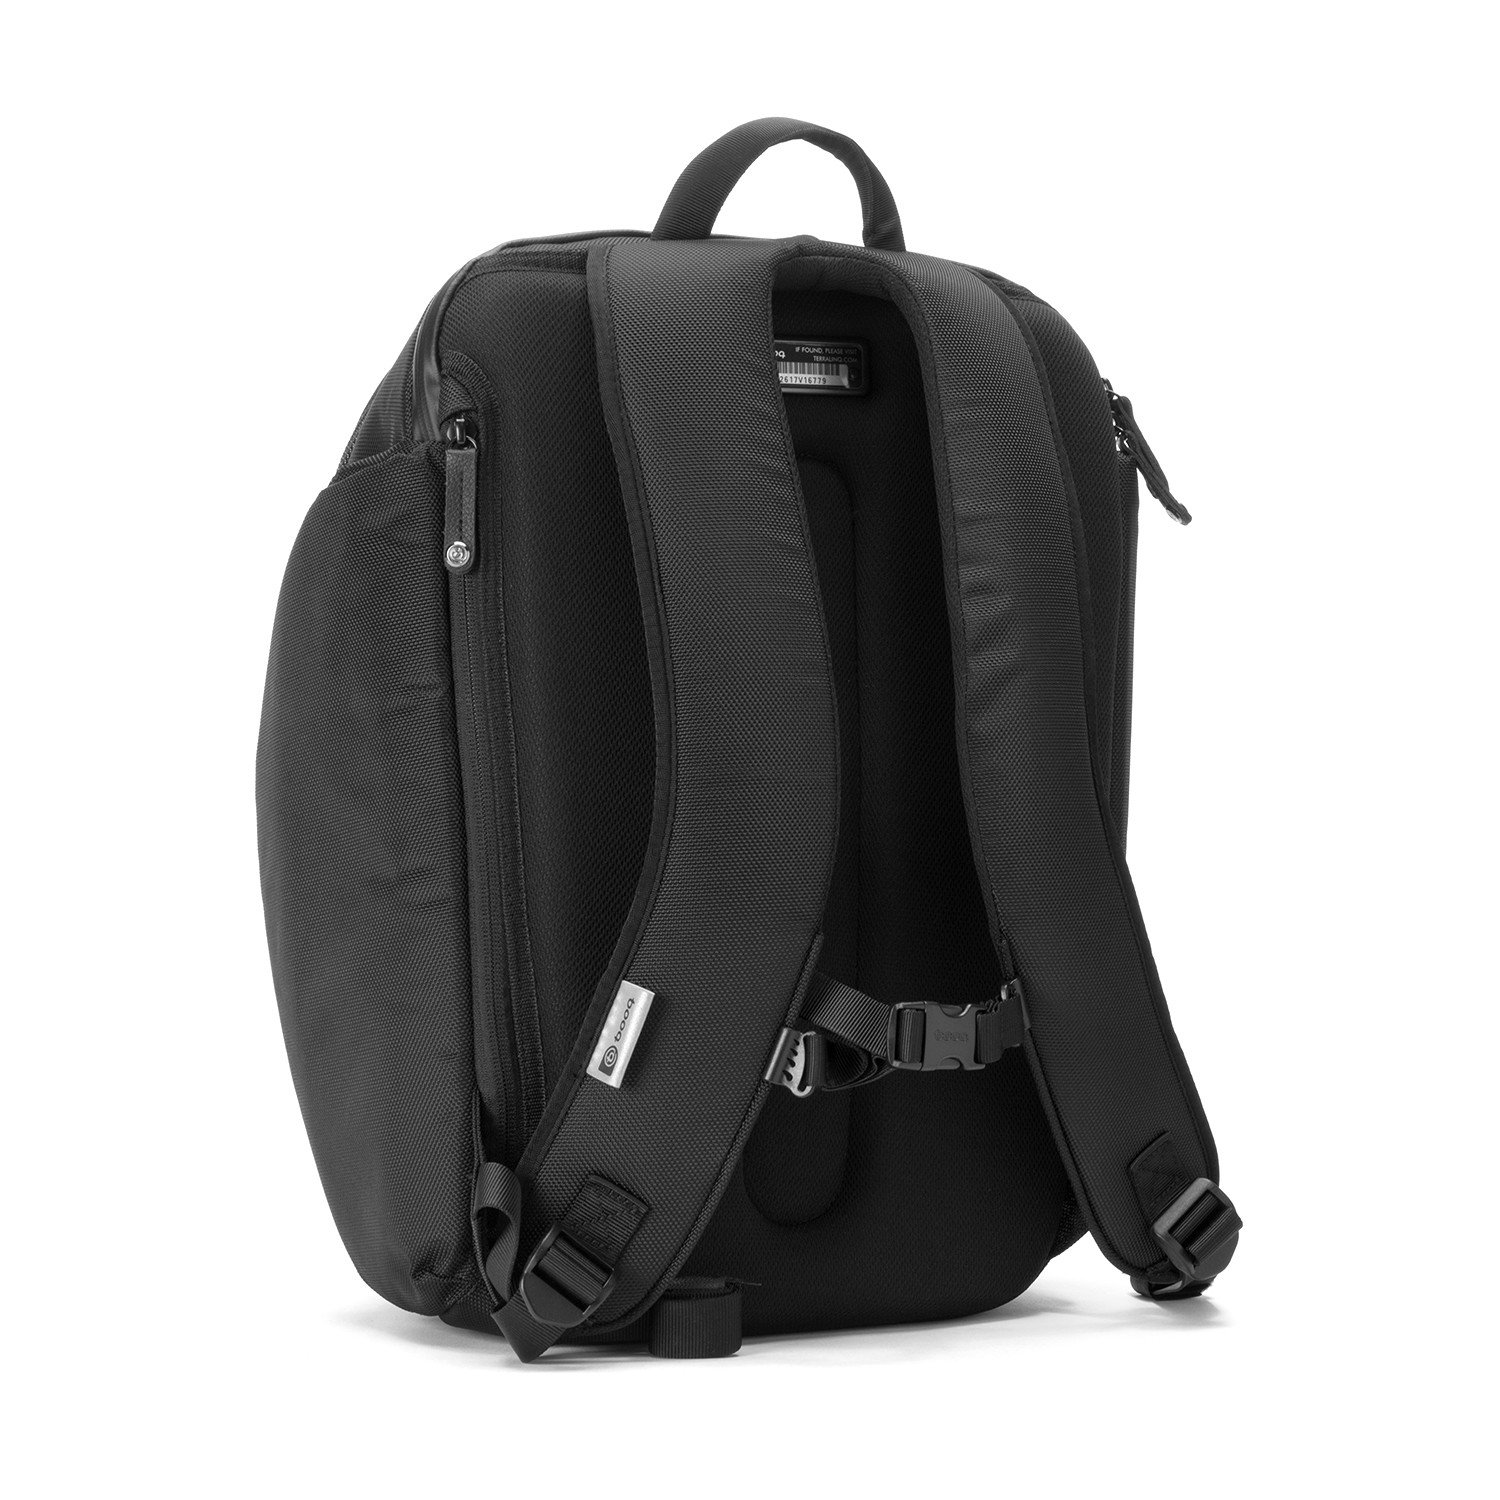 Shock Pro - Booq Bags - Touch of Modern